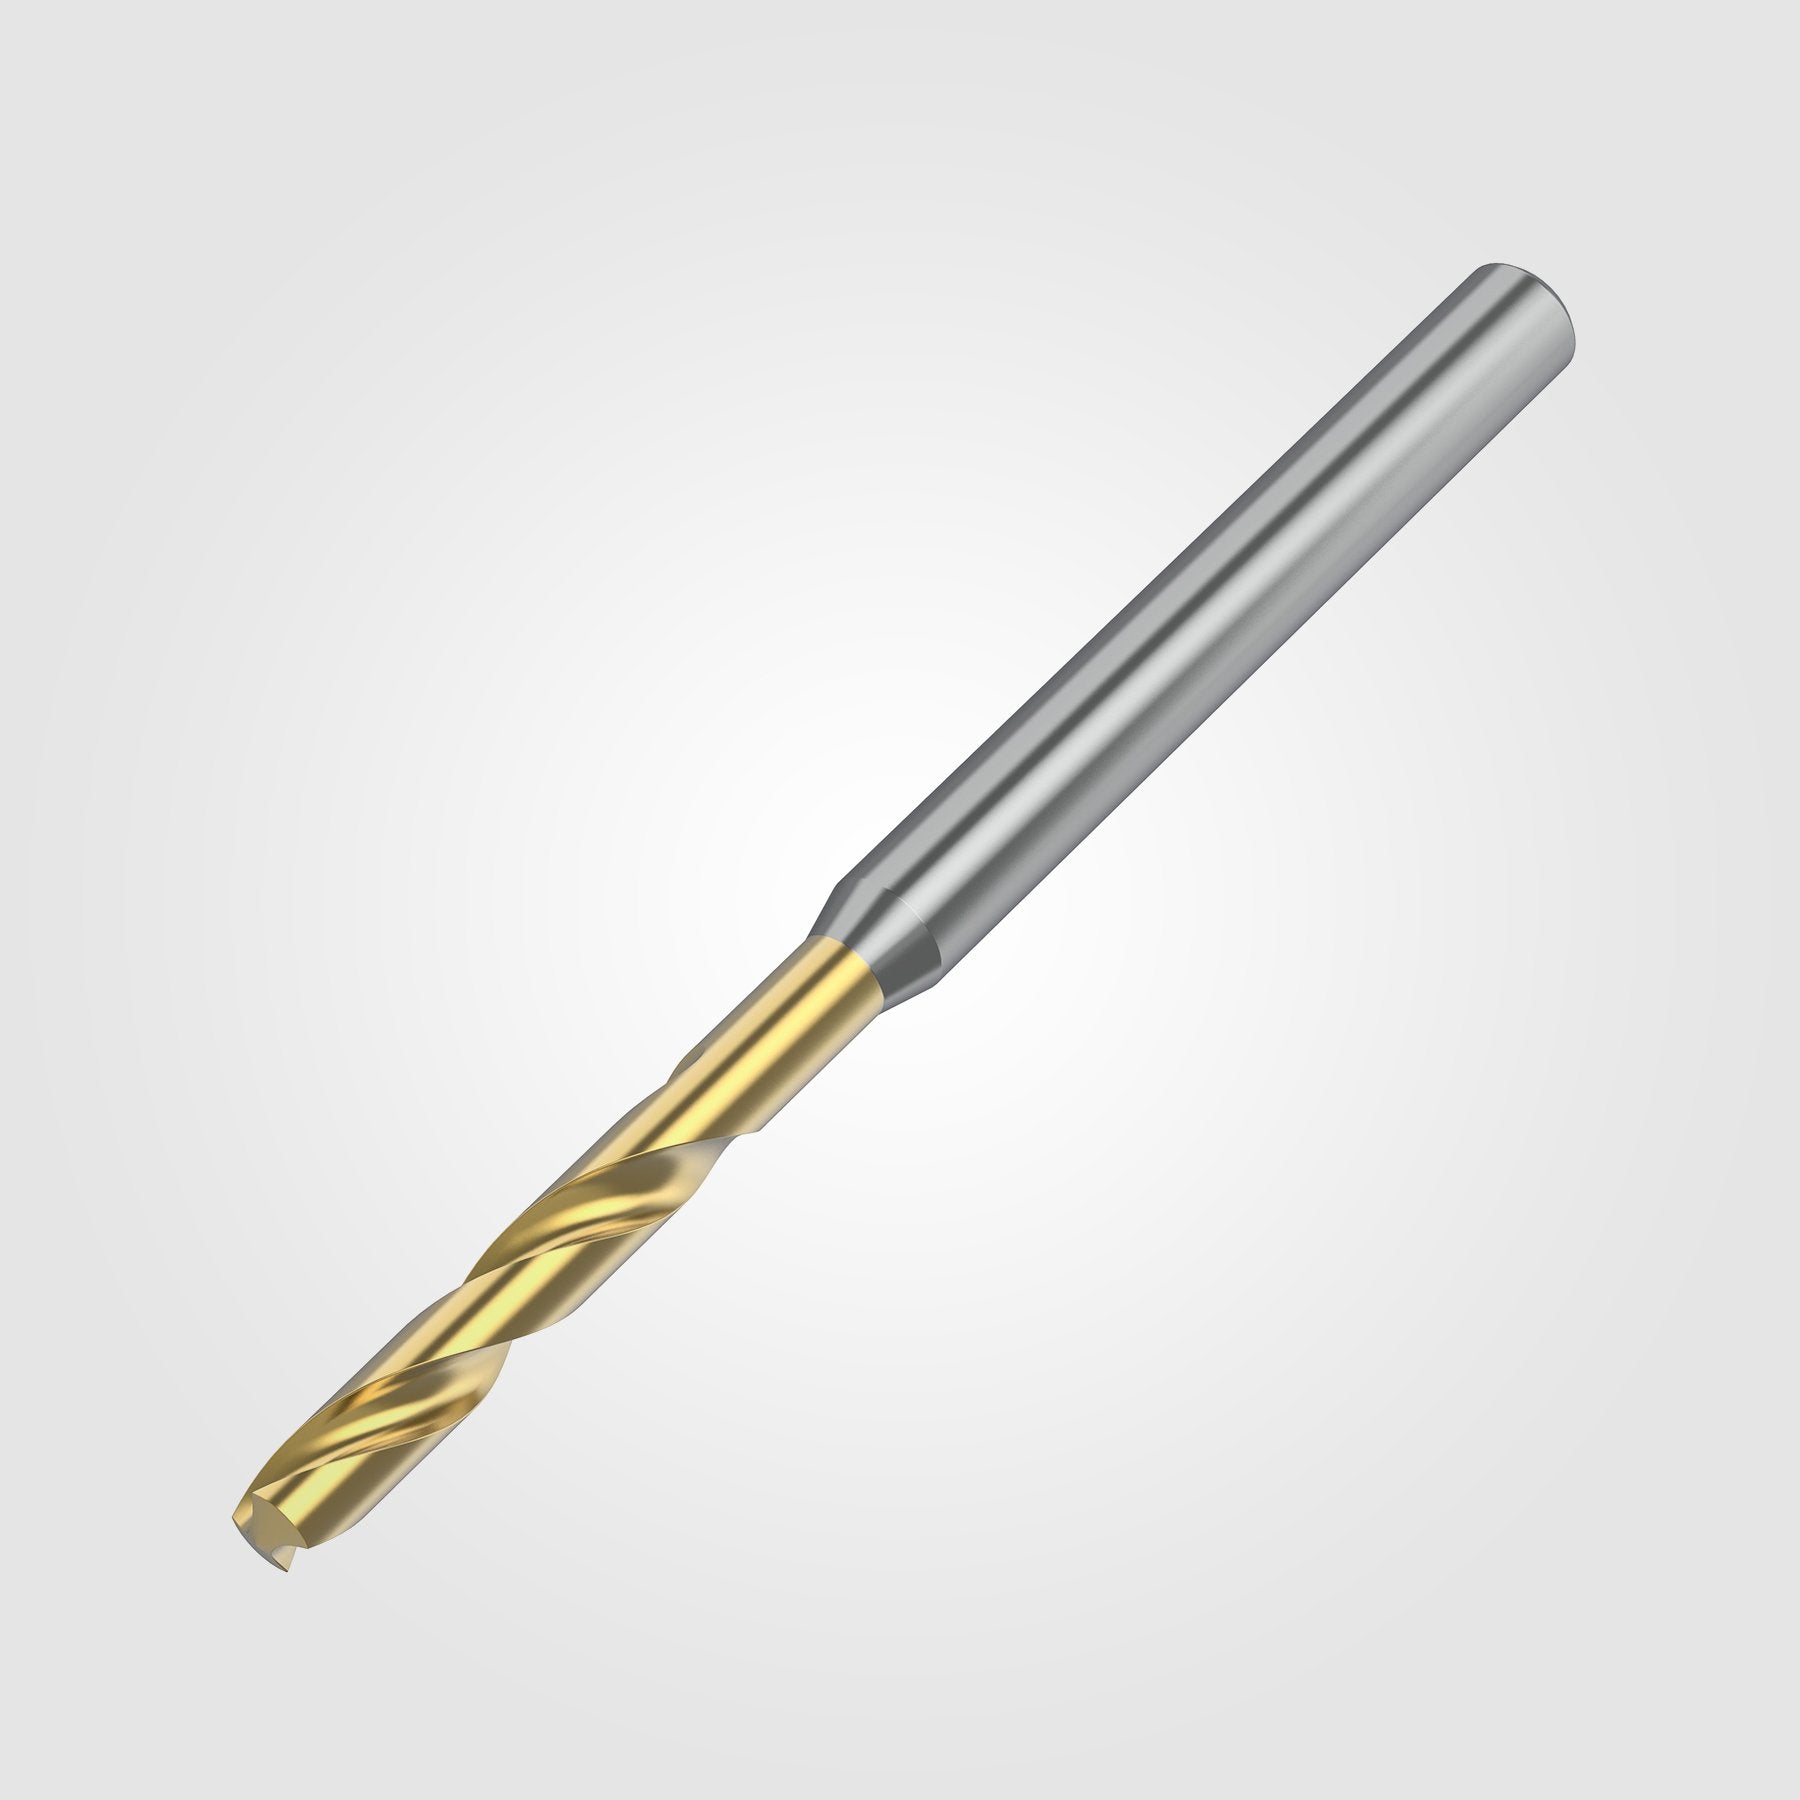 GOdrill (THROUGH COOLANT) | 4.1mm / .1614" / 3xD | SOLID CARBIDE DRILL | 4151120